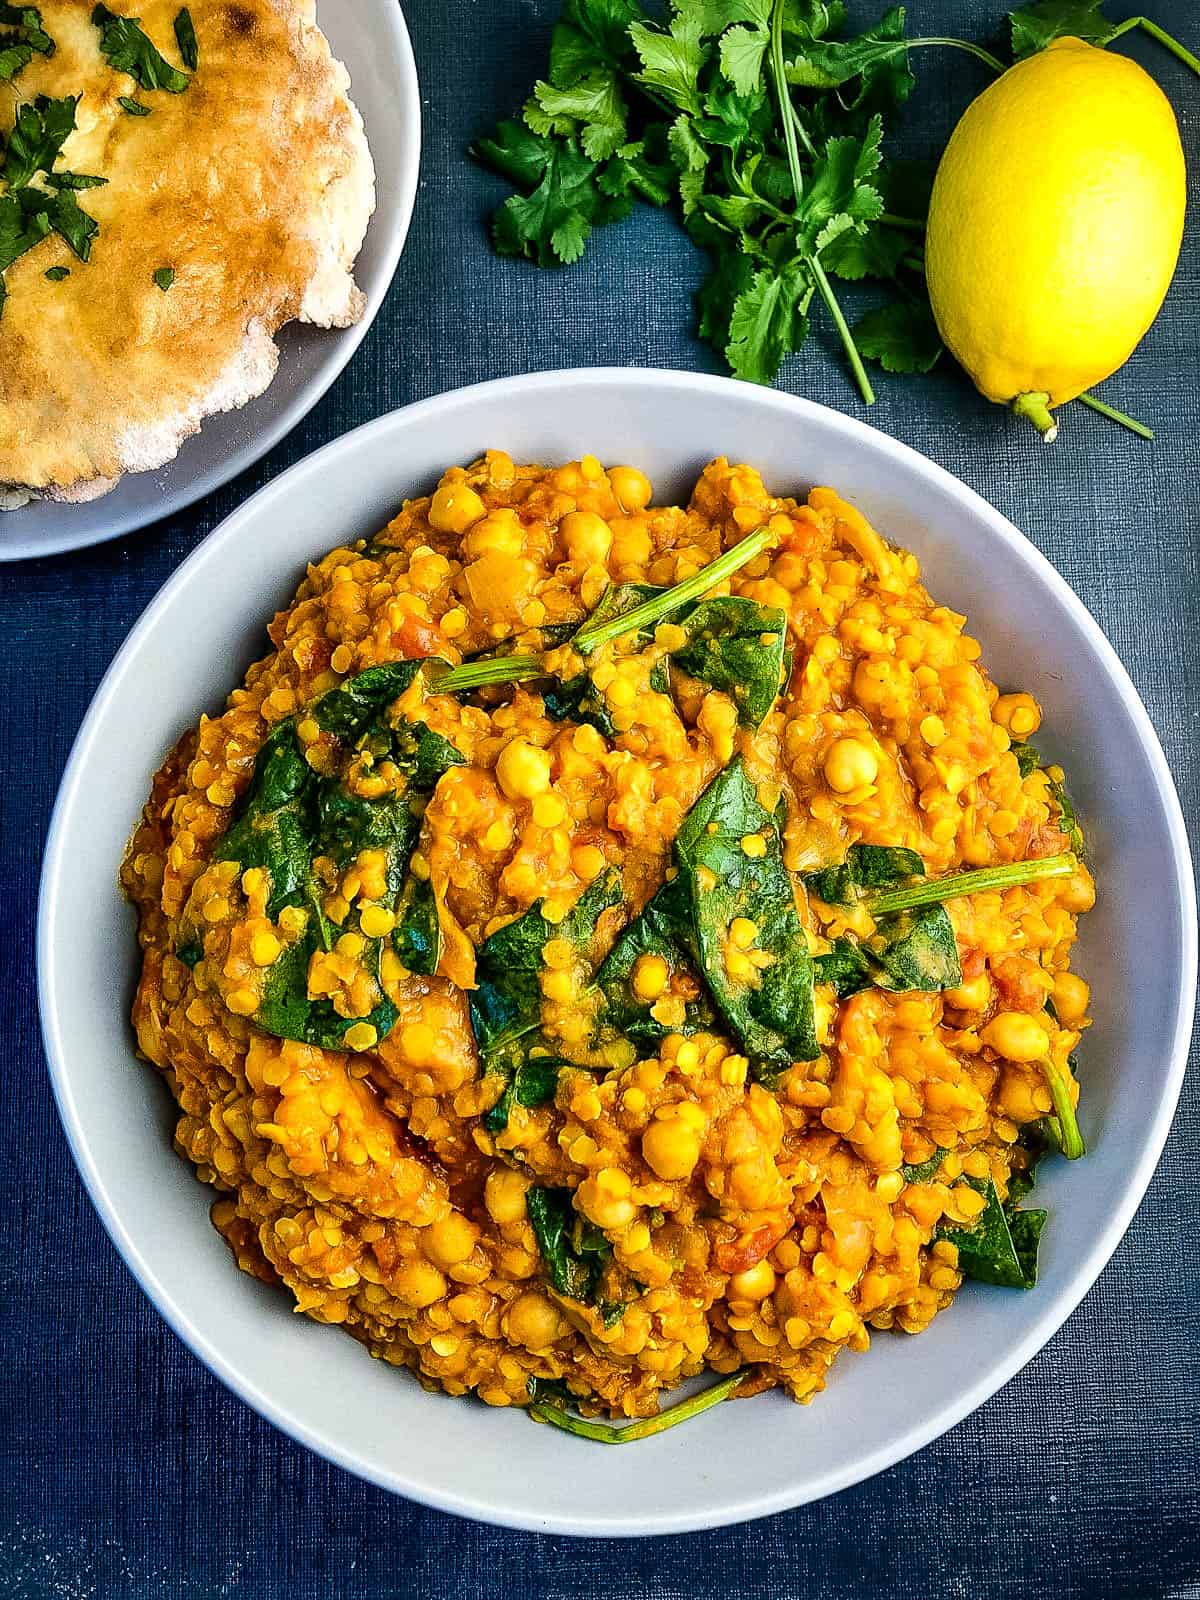 red lentil and chickpea curry with spinach in a bowl.